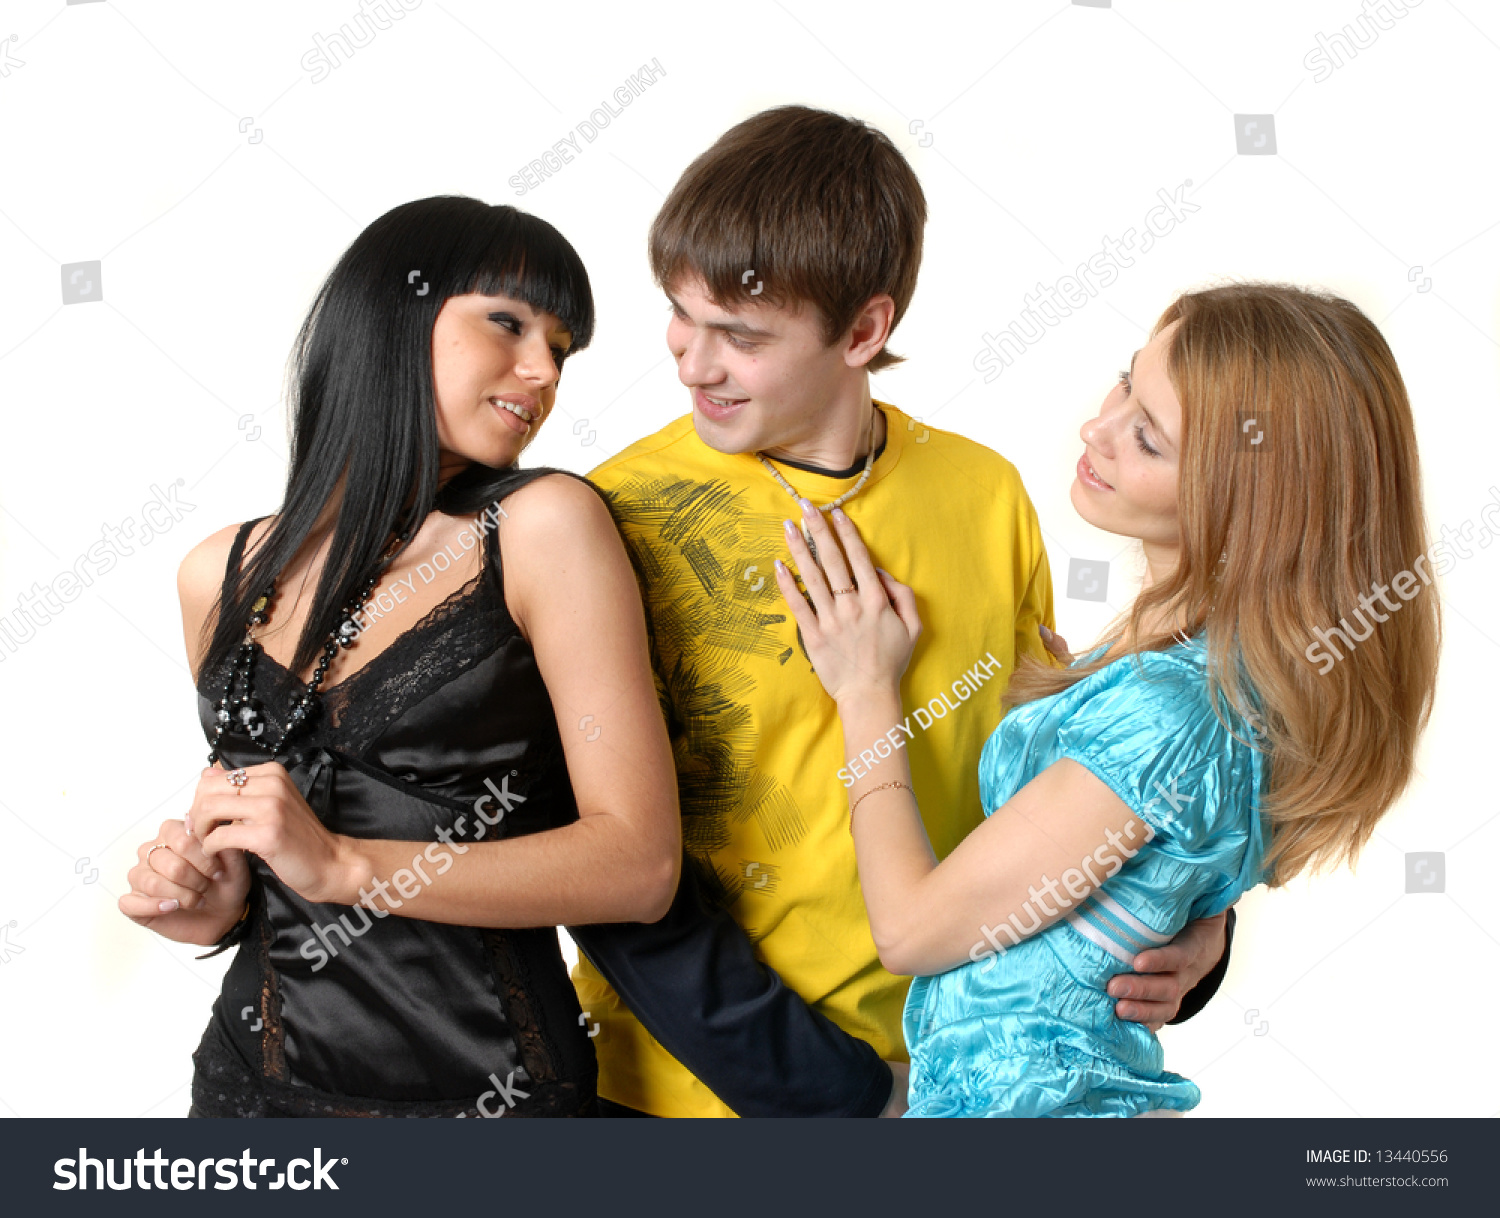 Two girls and a boy